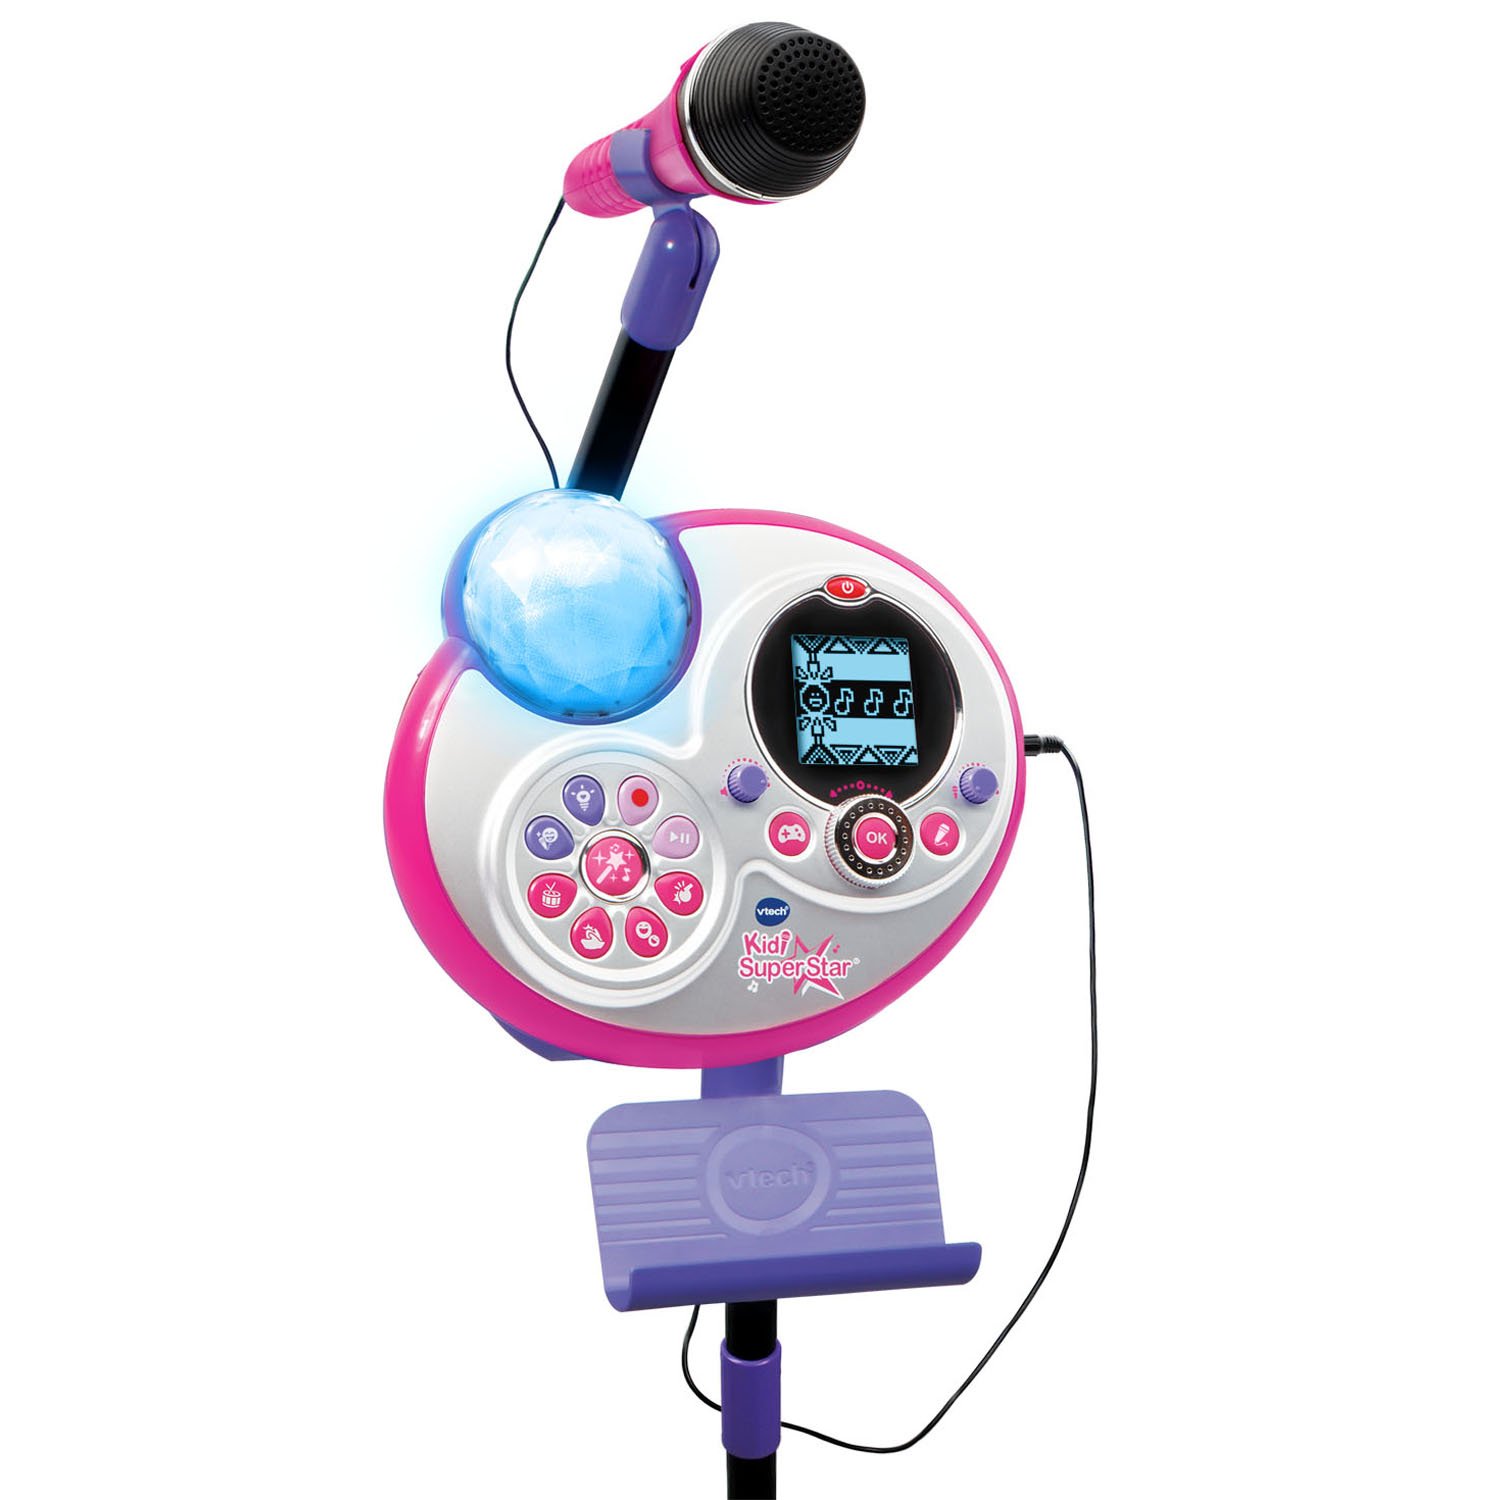 VTech Kidi Super Star Karaoke System with Mic Stand Amazon Exclusive